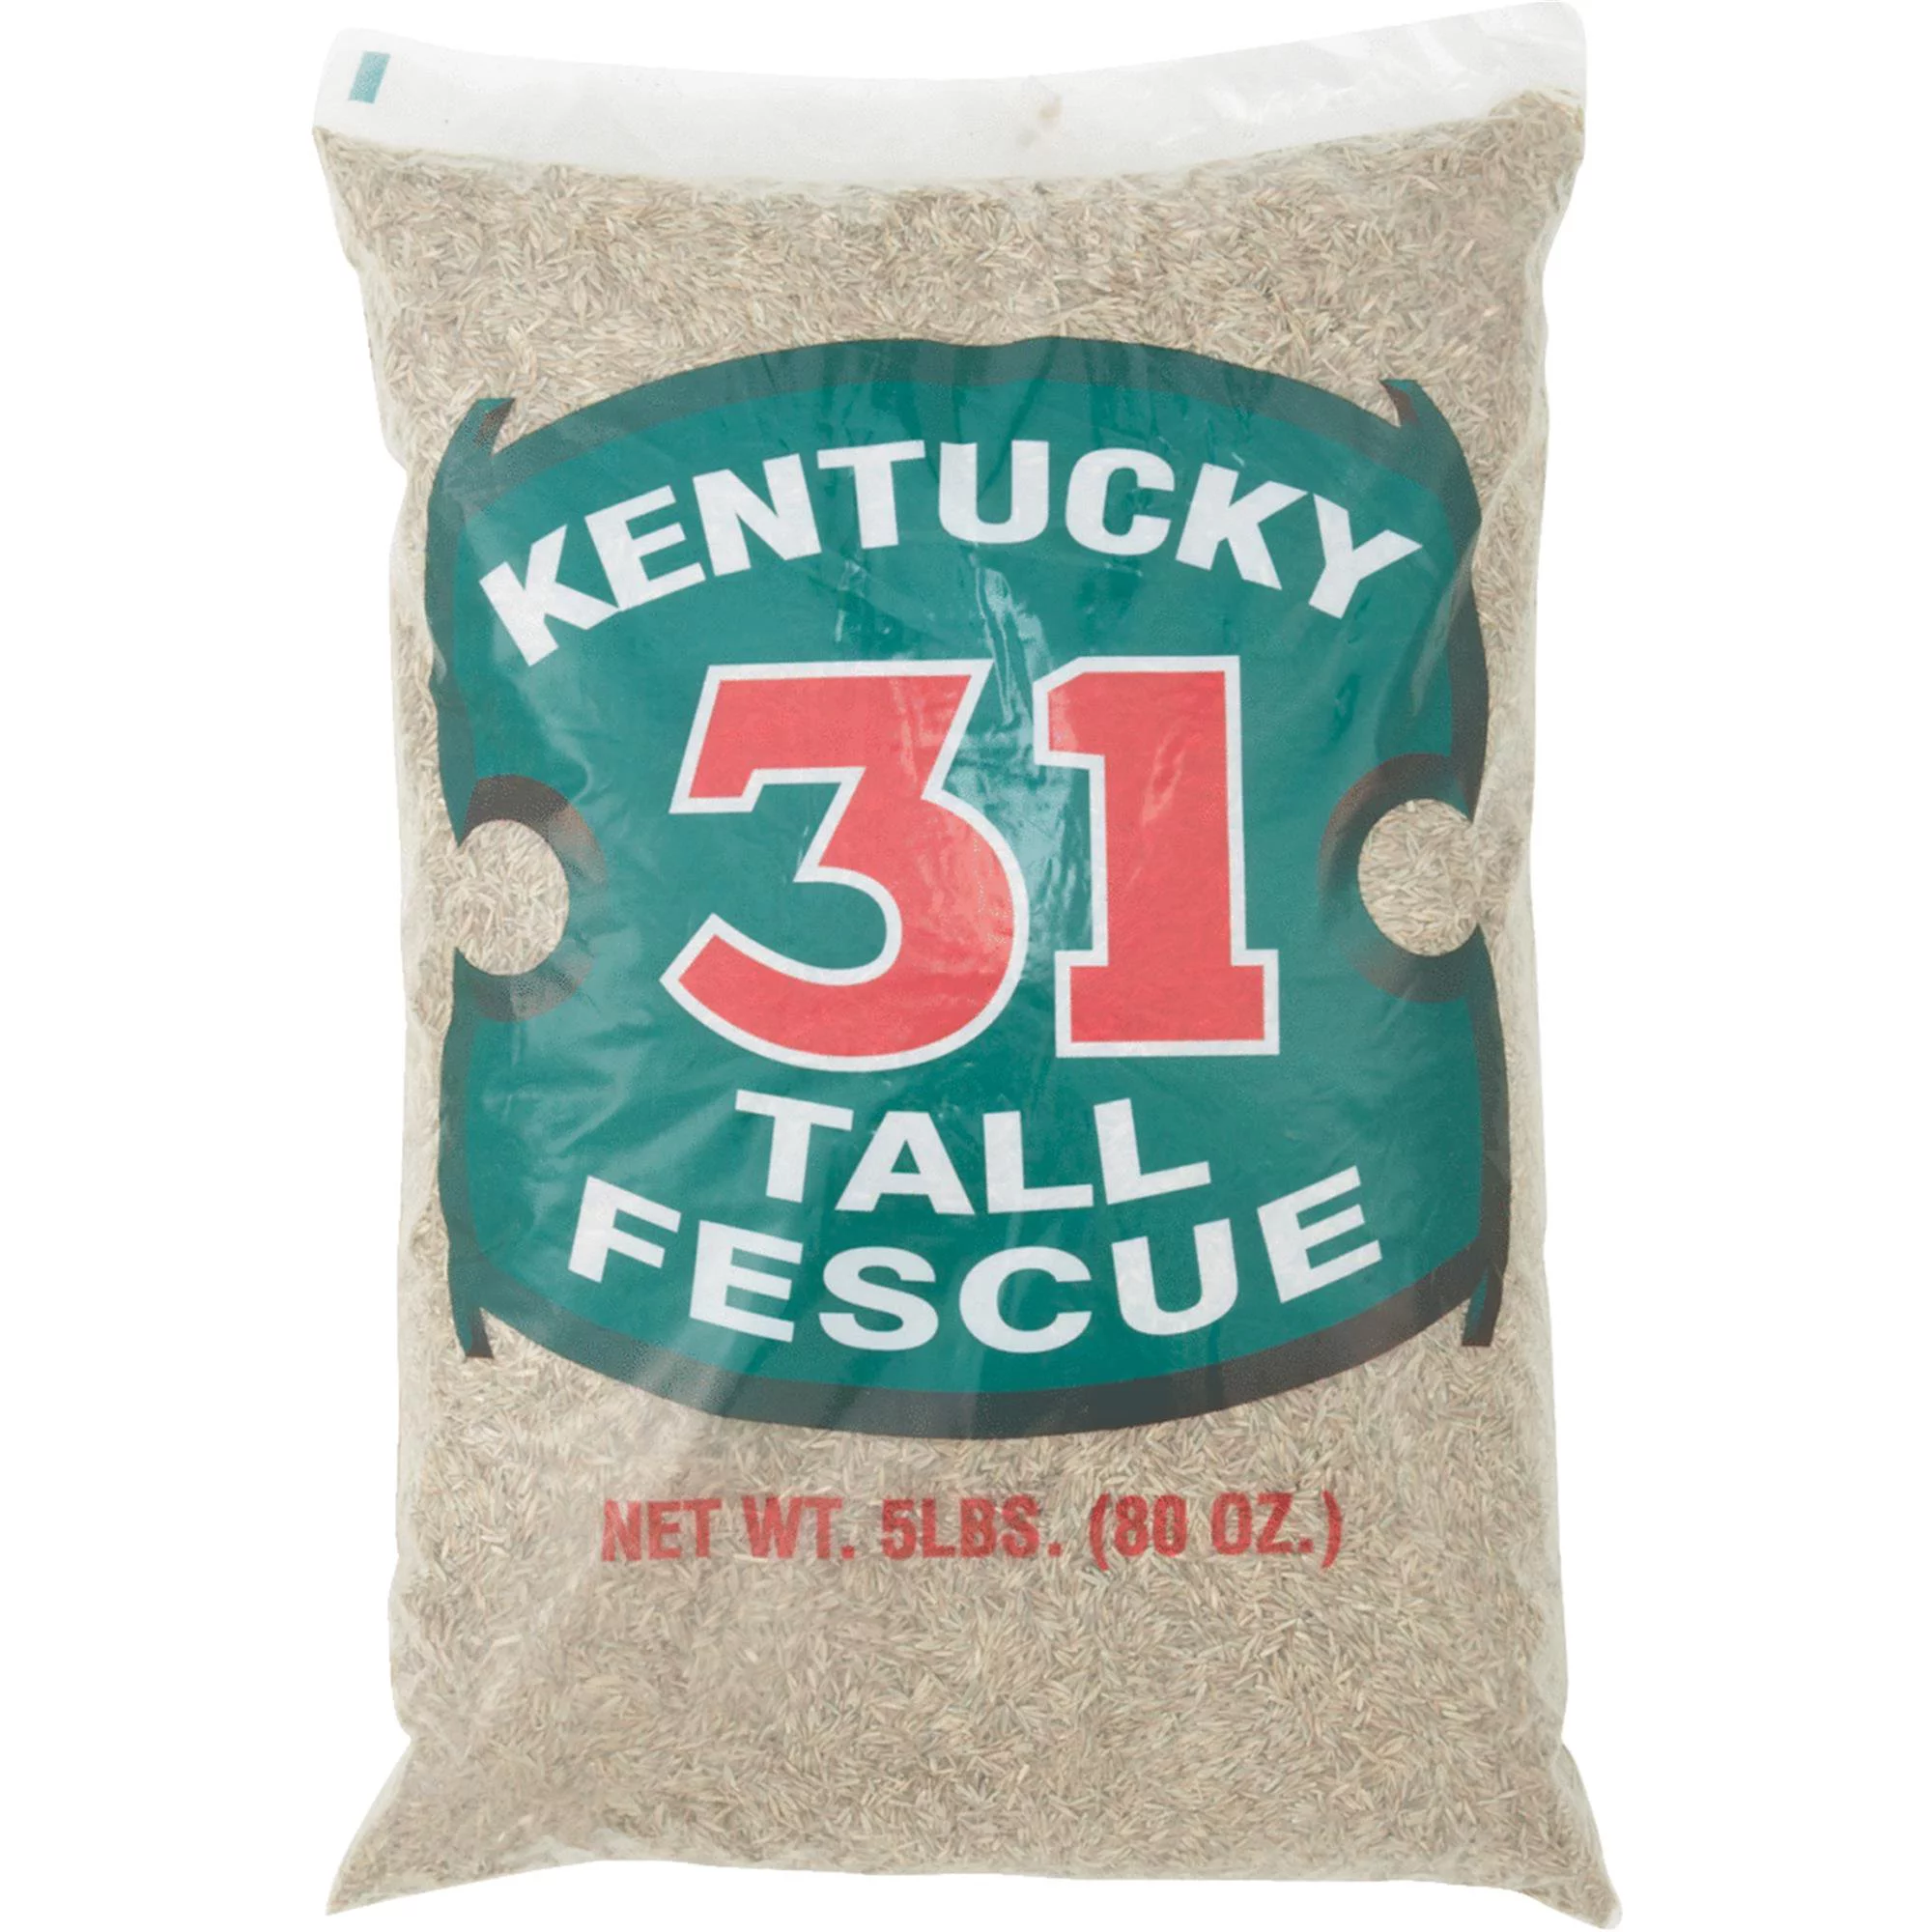 When To Plant Kentucky 31 Fescue Grass Seed